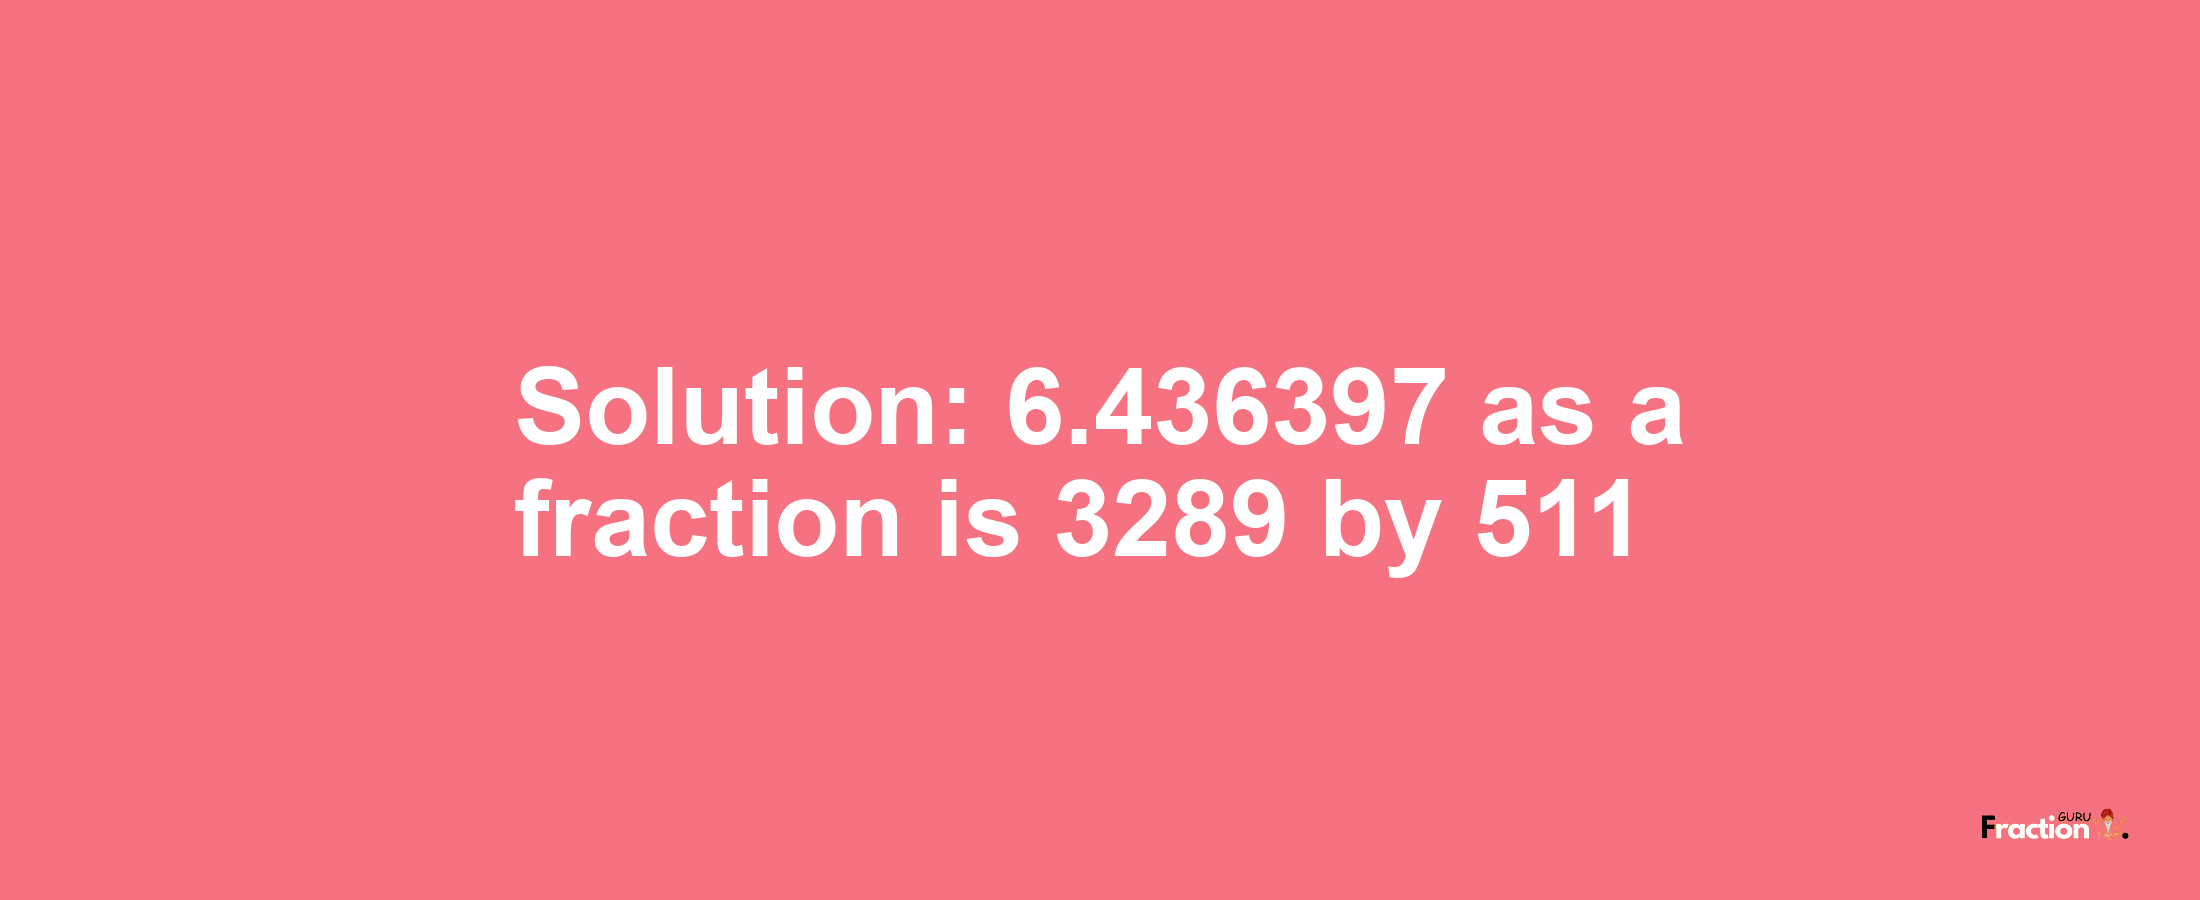 Solution:6.436397 as a fraction is 3289/511